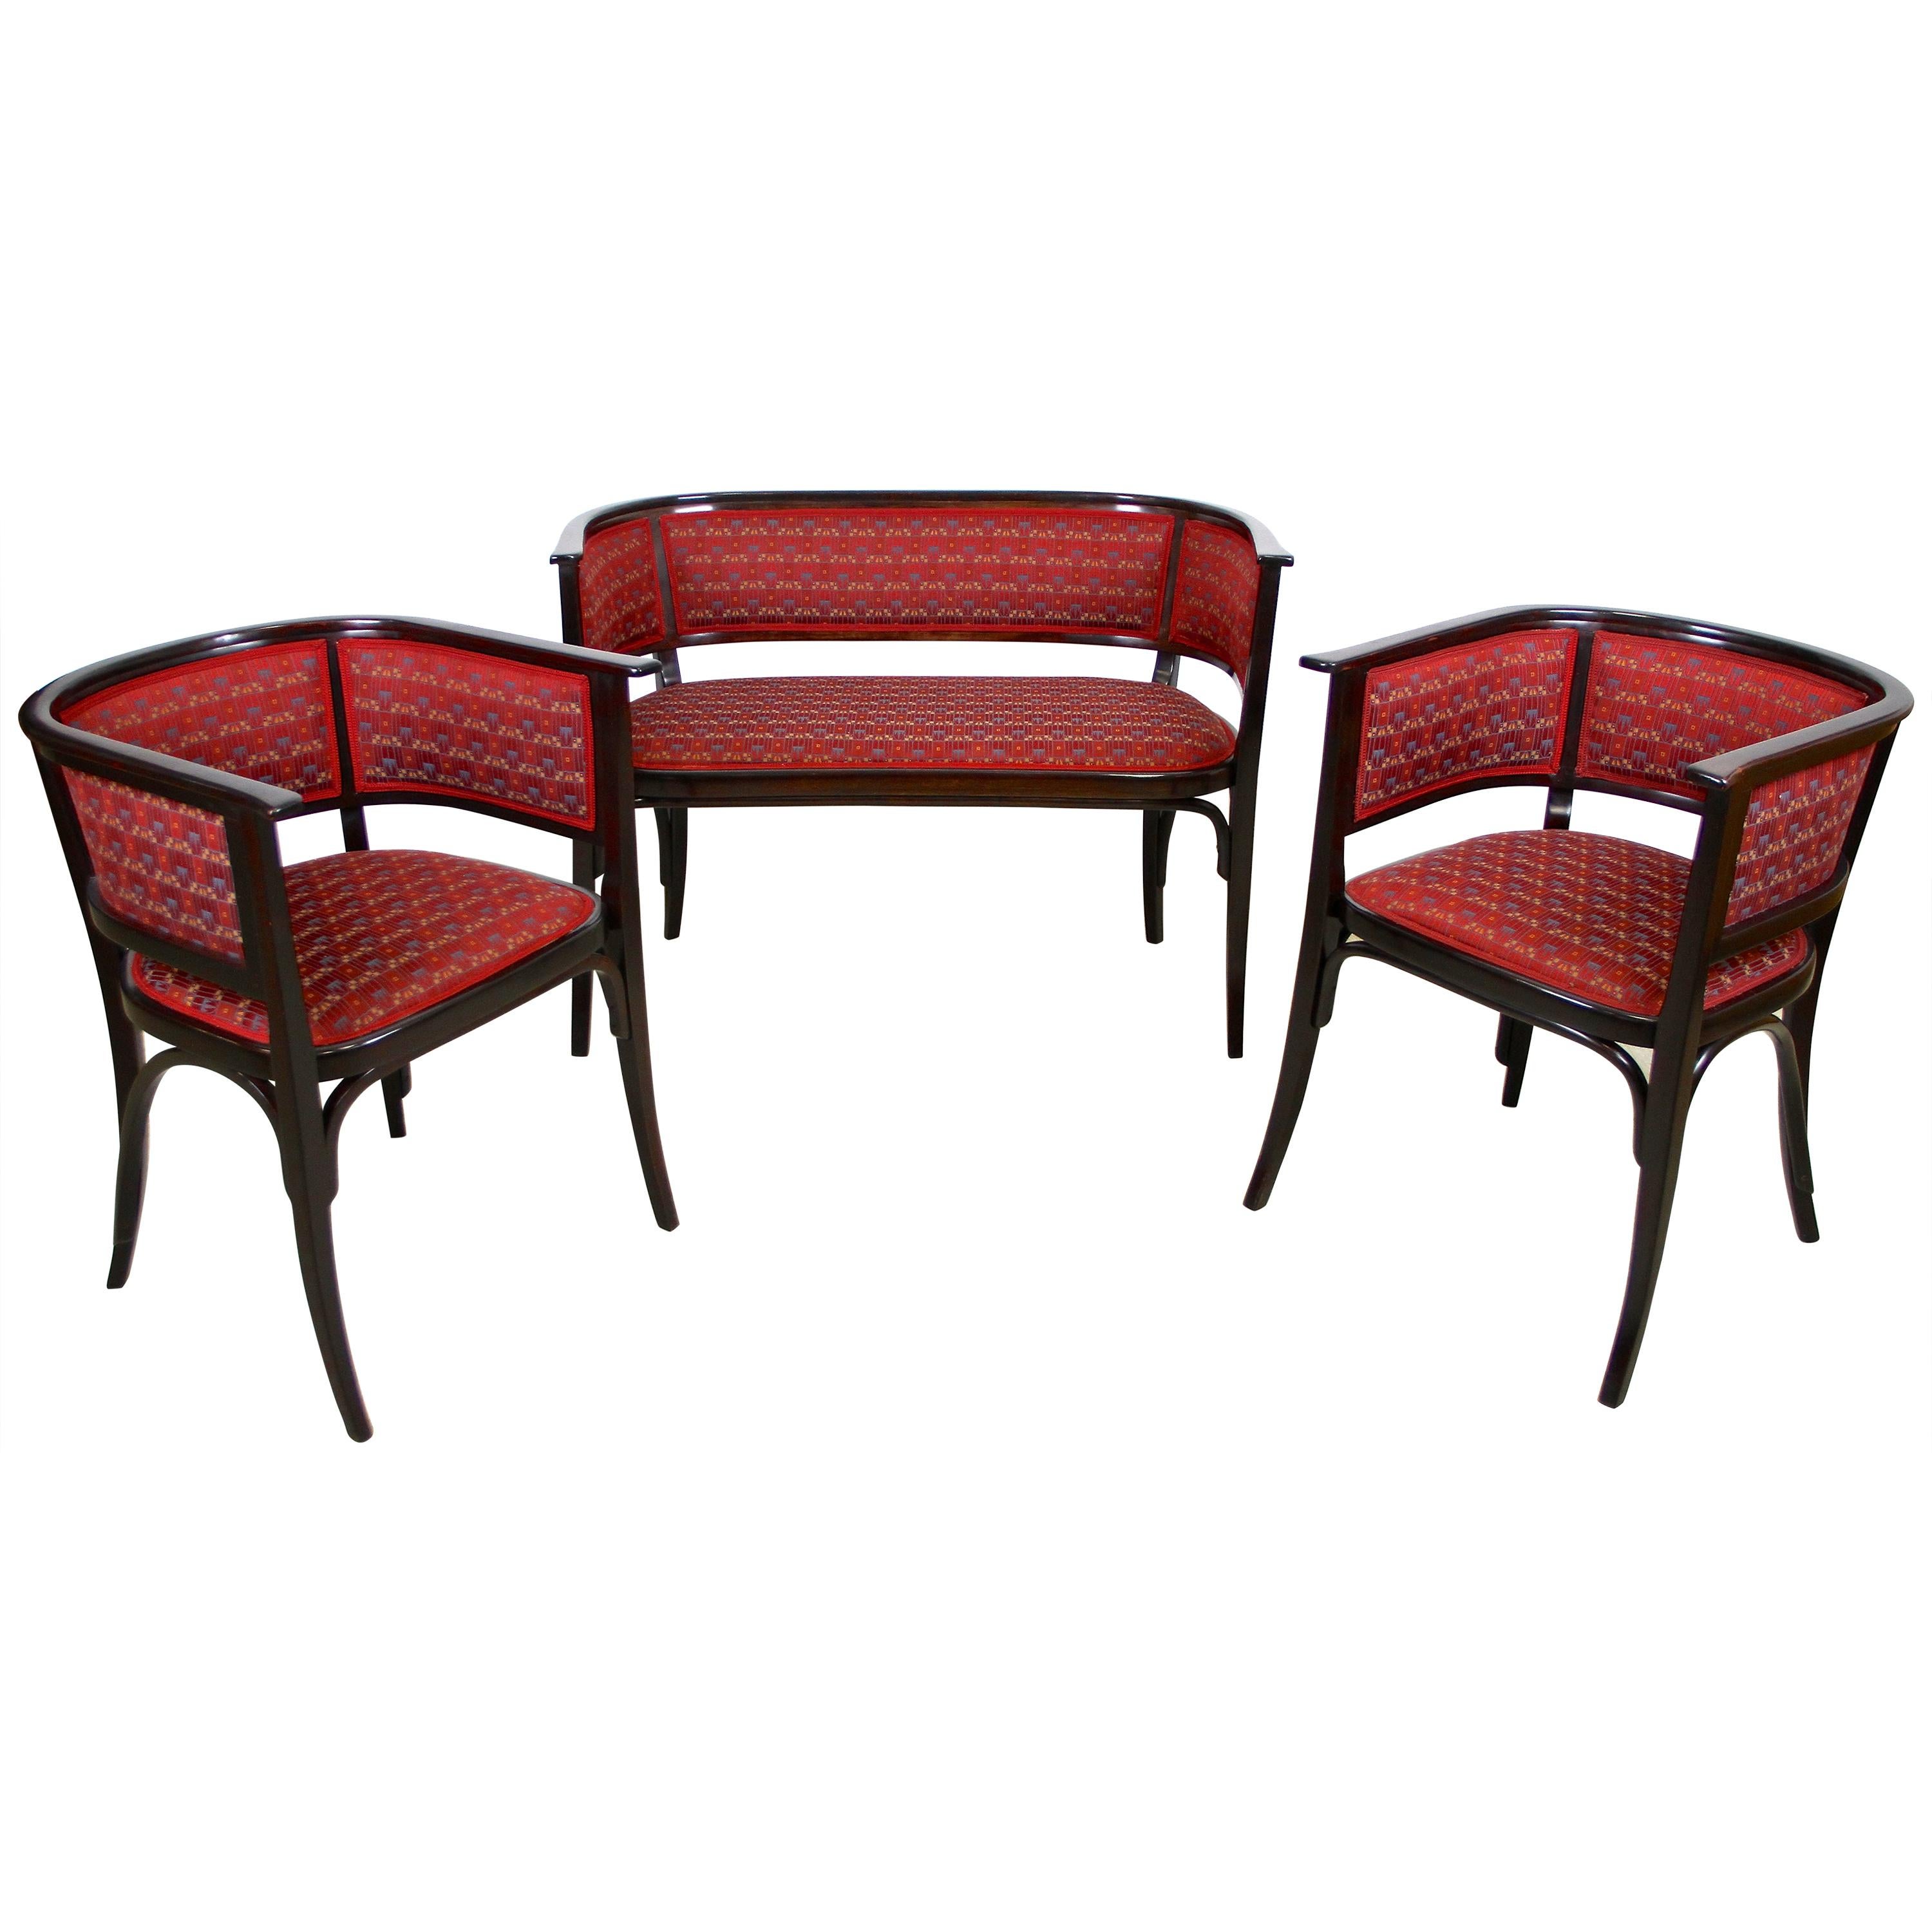 Thonet Bentwood Seating Set with Two Armchairs and Bench, Austria, circa 1910